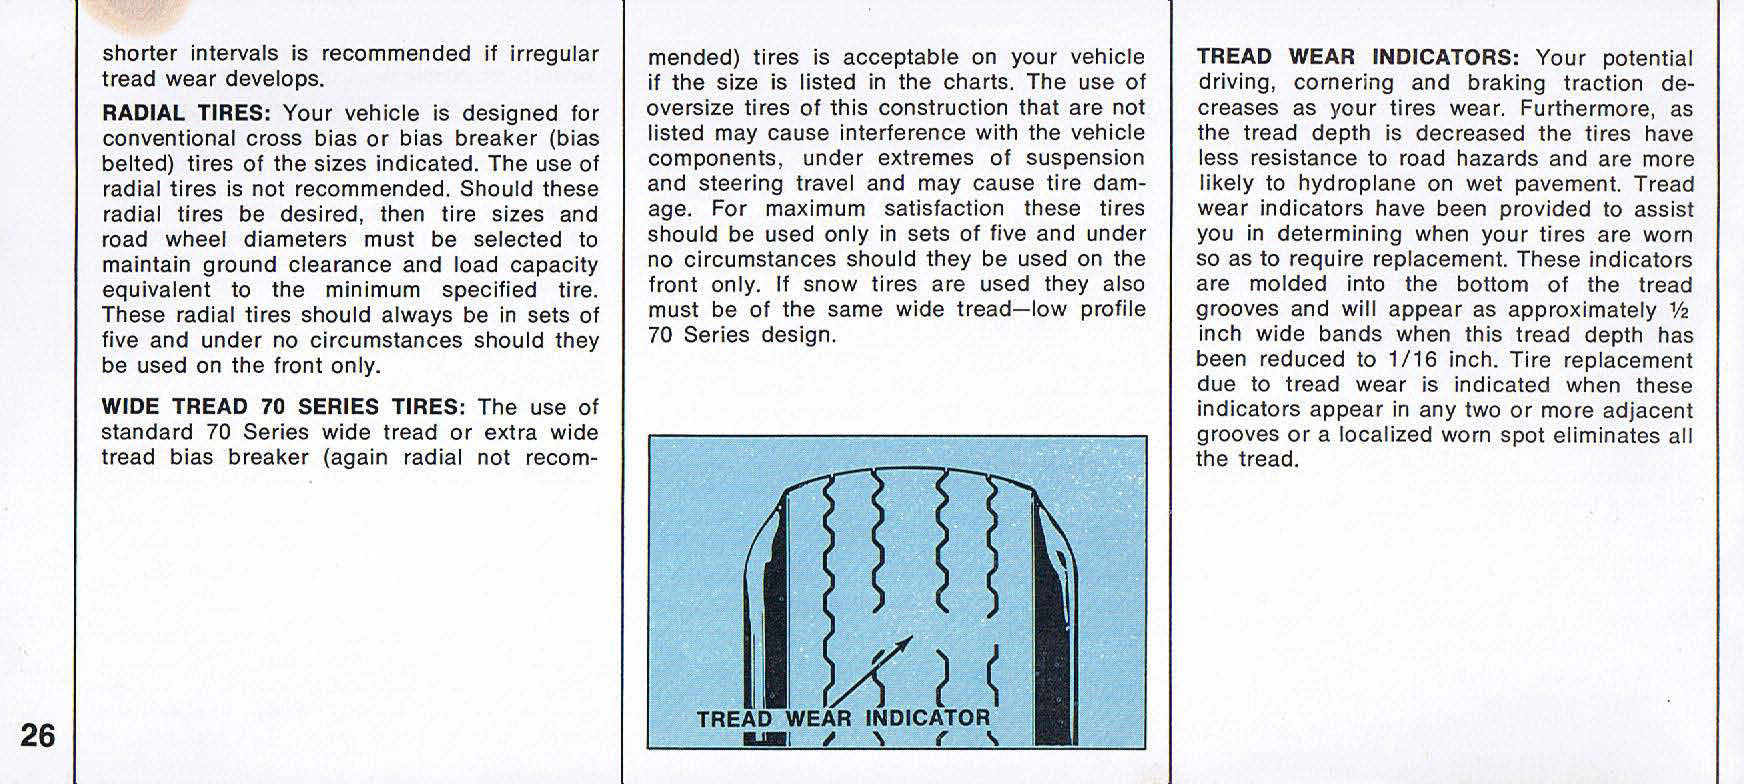 1969_Plymouth_Valiant_Owners_Manual-26